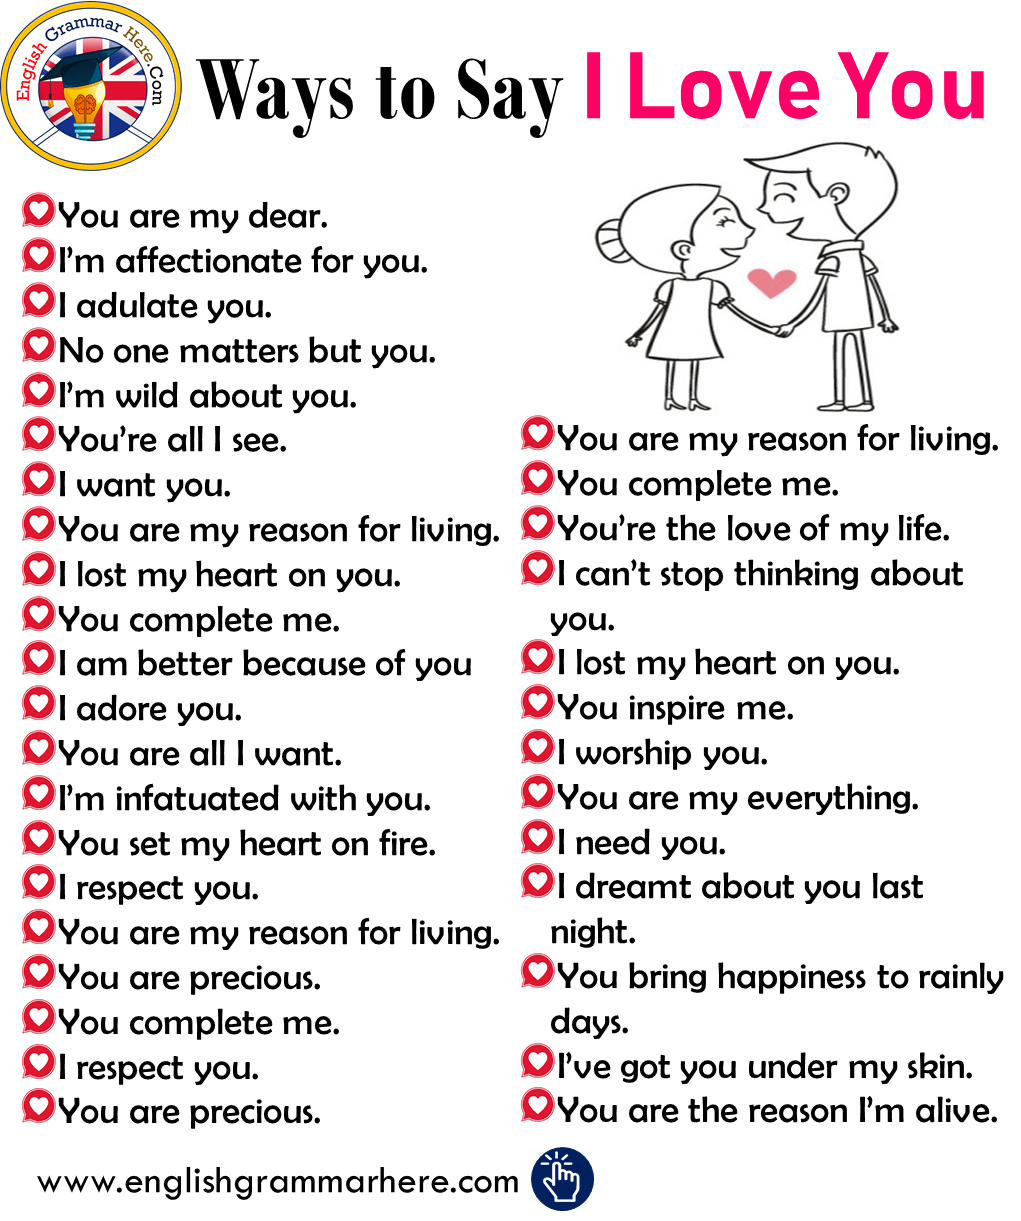 How to say Different Ways to Say I Love You in english;